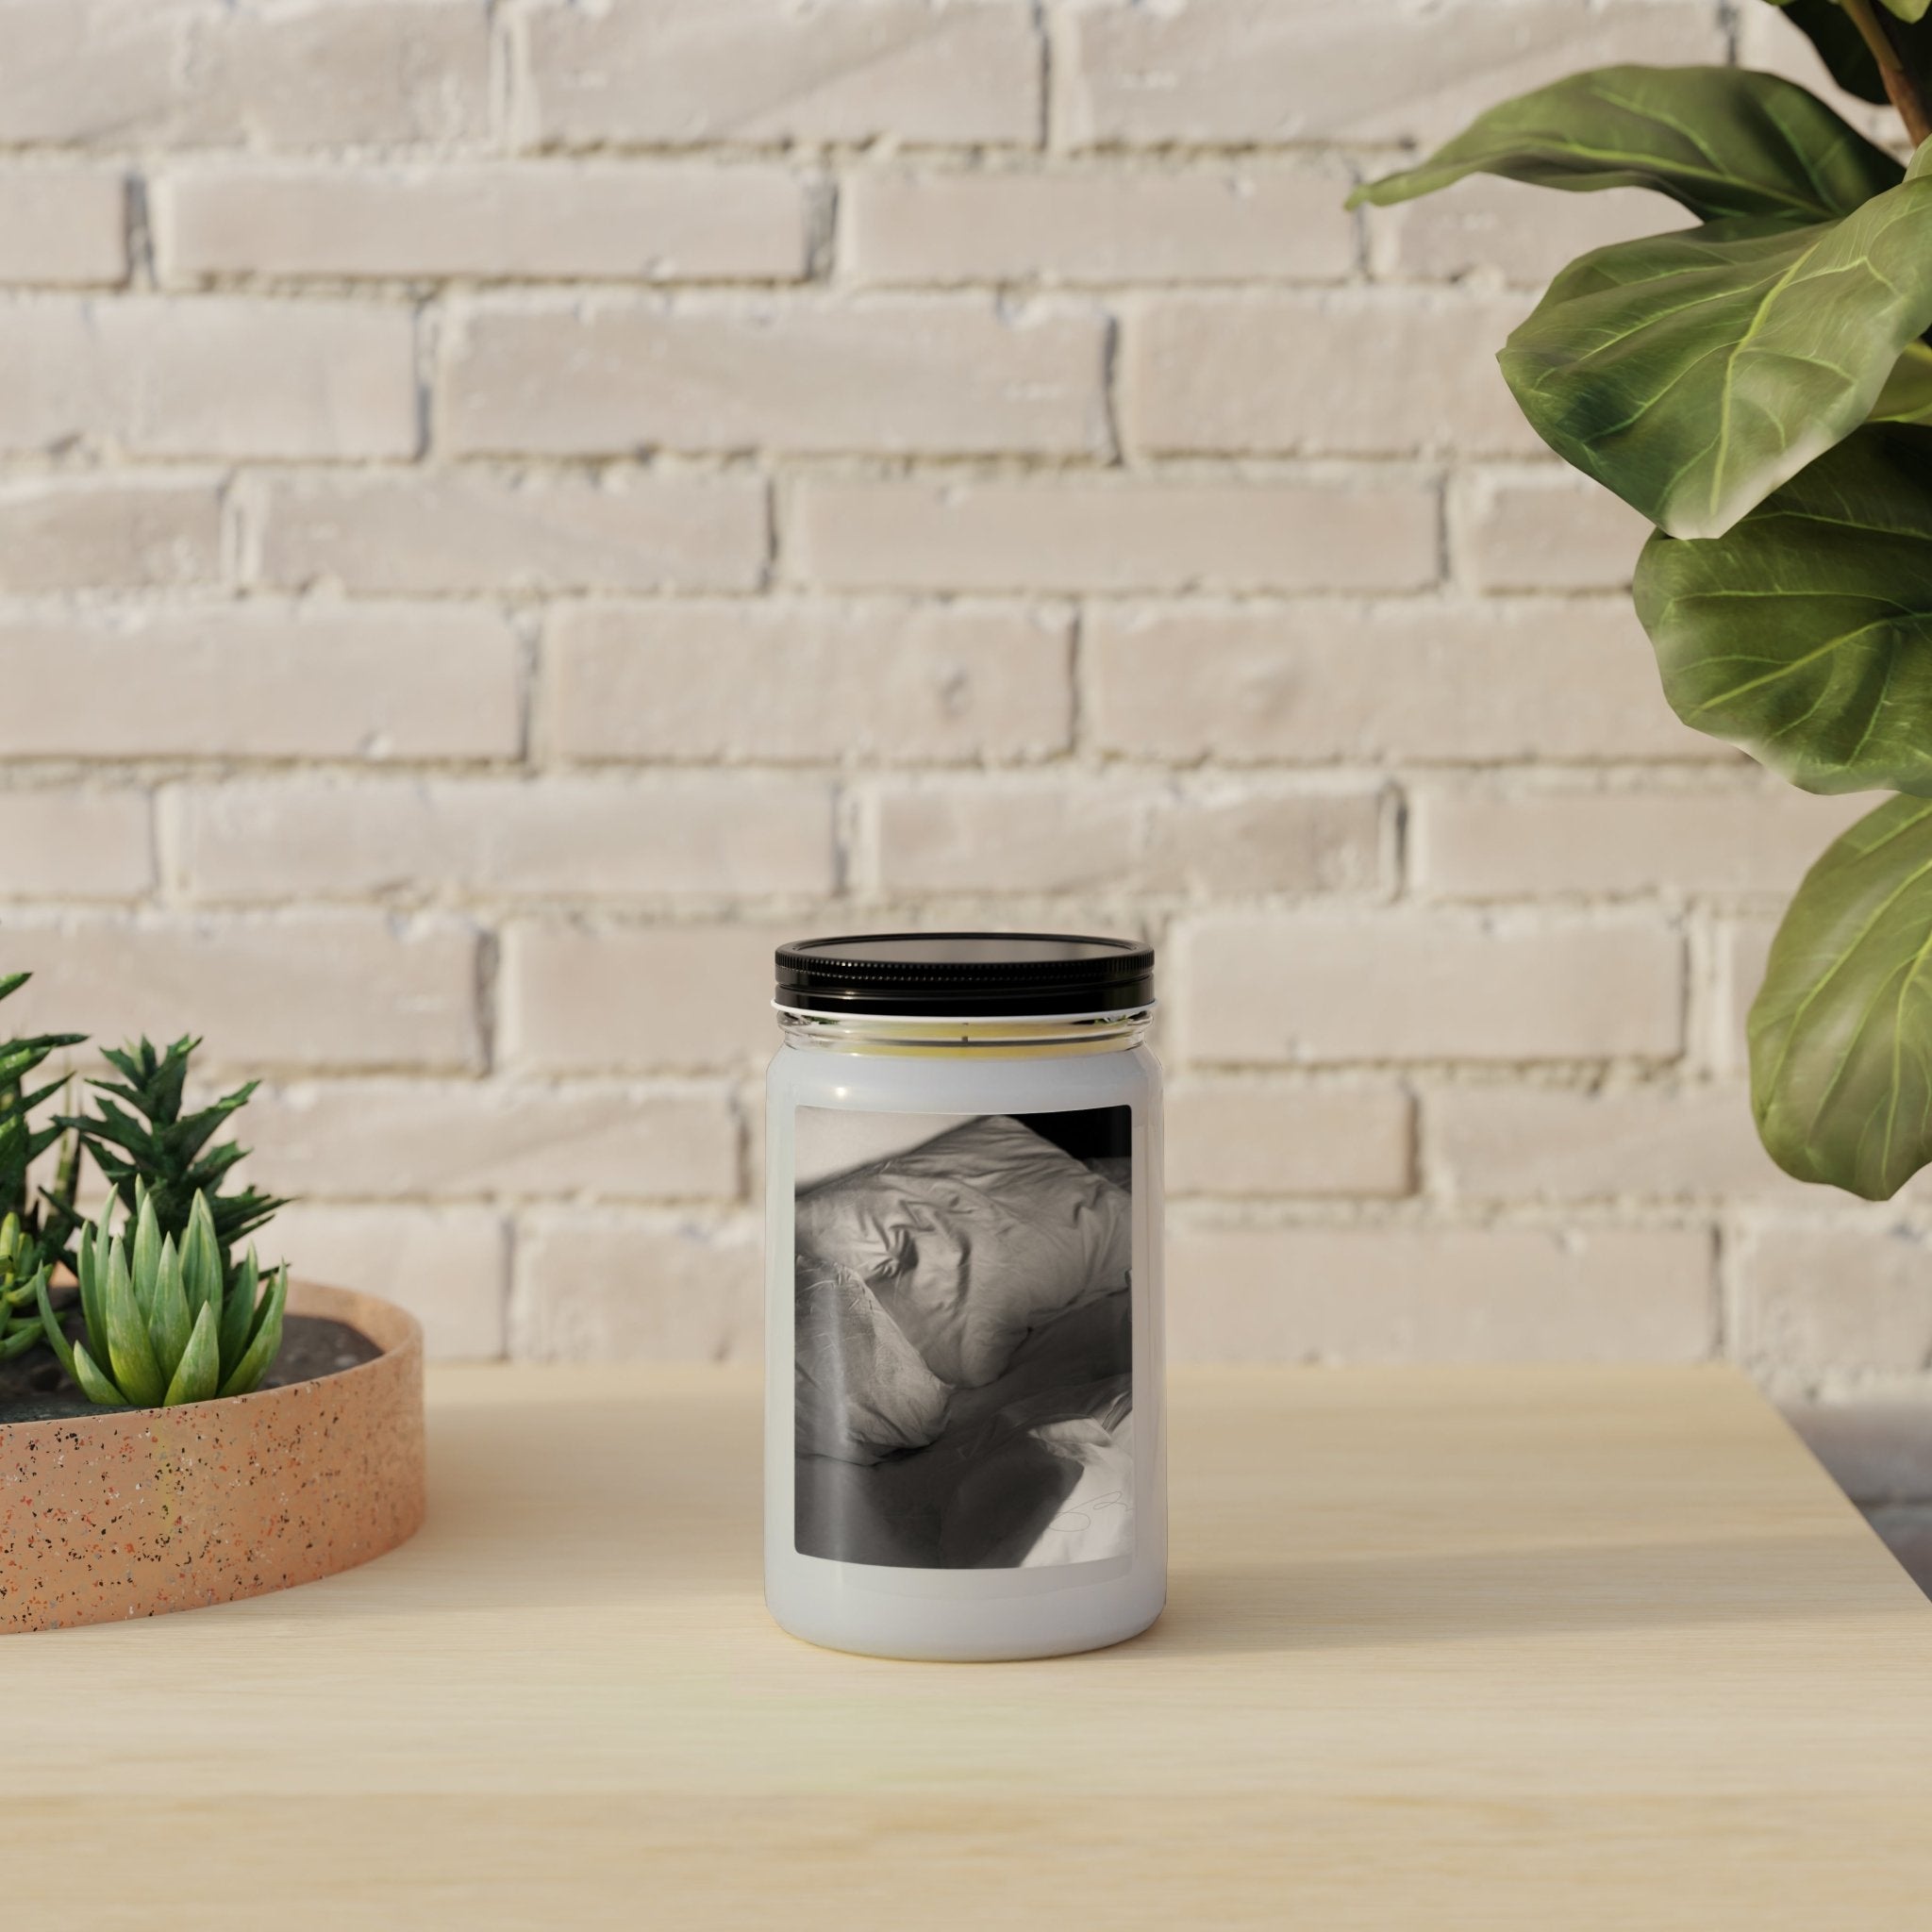 Sharon Radisch Scented Candle in Mason Jar: Lazy Morning - Candlefy